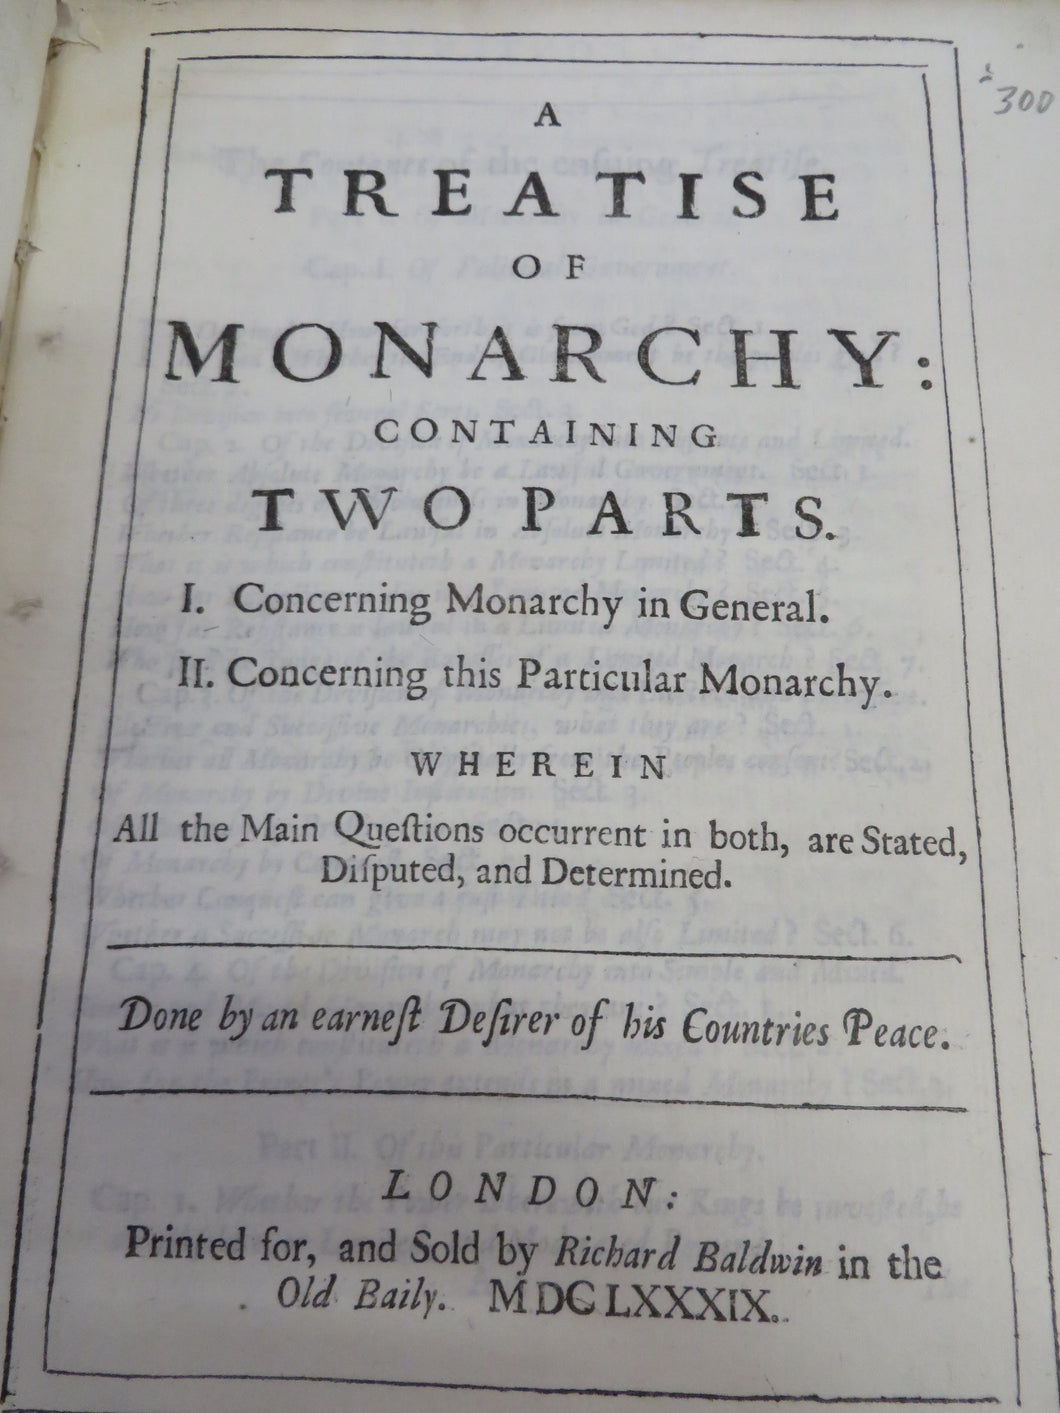 A Treatise of Monarchy: Containing Two Parts. 1. Concerning Monarchy in General. II. Concerning this Particular Monarchy. Wherein All the Main Questions occurrent in both, are Stated, Disputed, and Determined